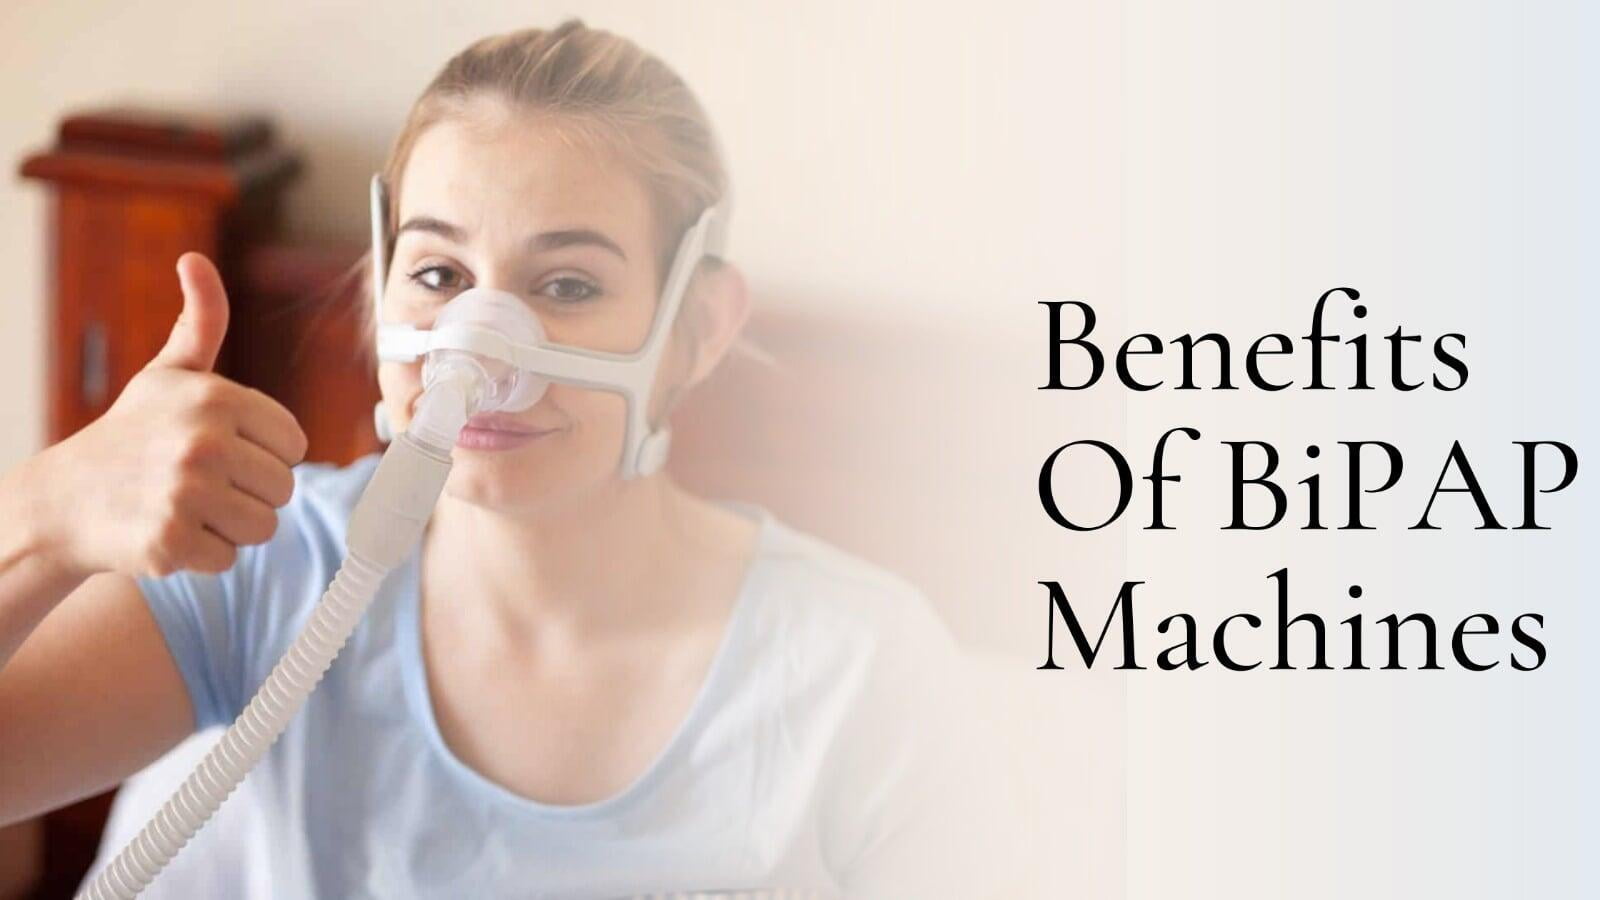 The Benefits of Using a BiPAP Machine